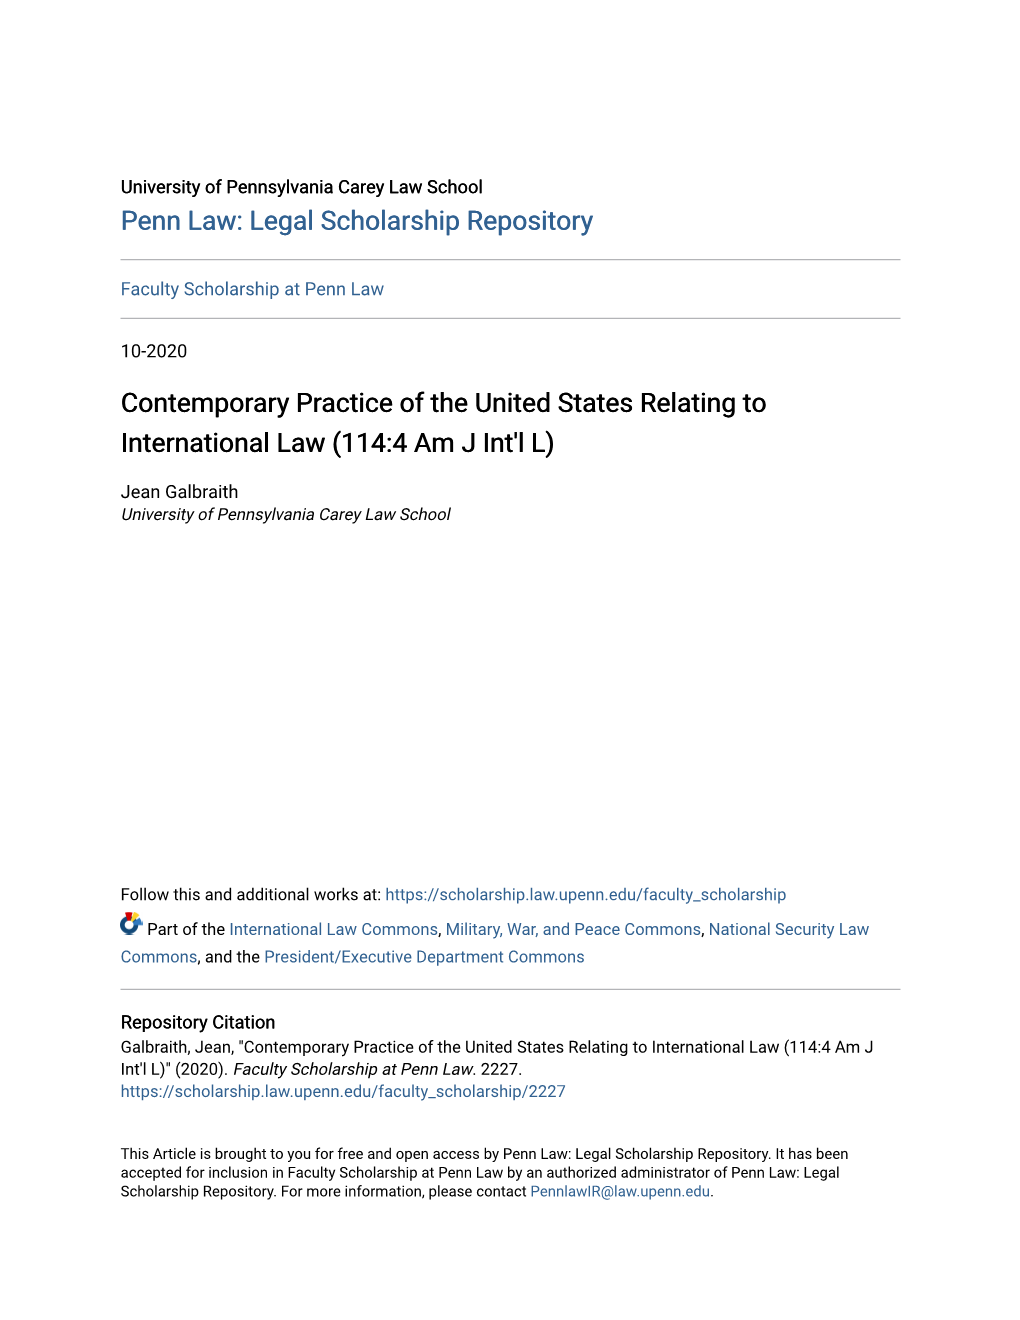 Contemporary Practice of the United States Relating to International Law (114:4 Am J Int'l L)